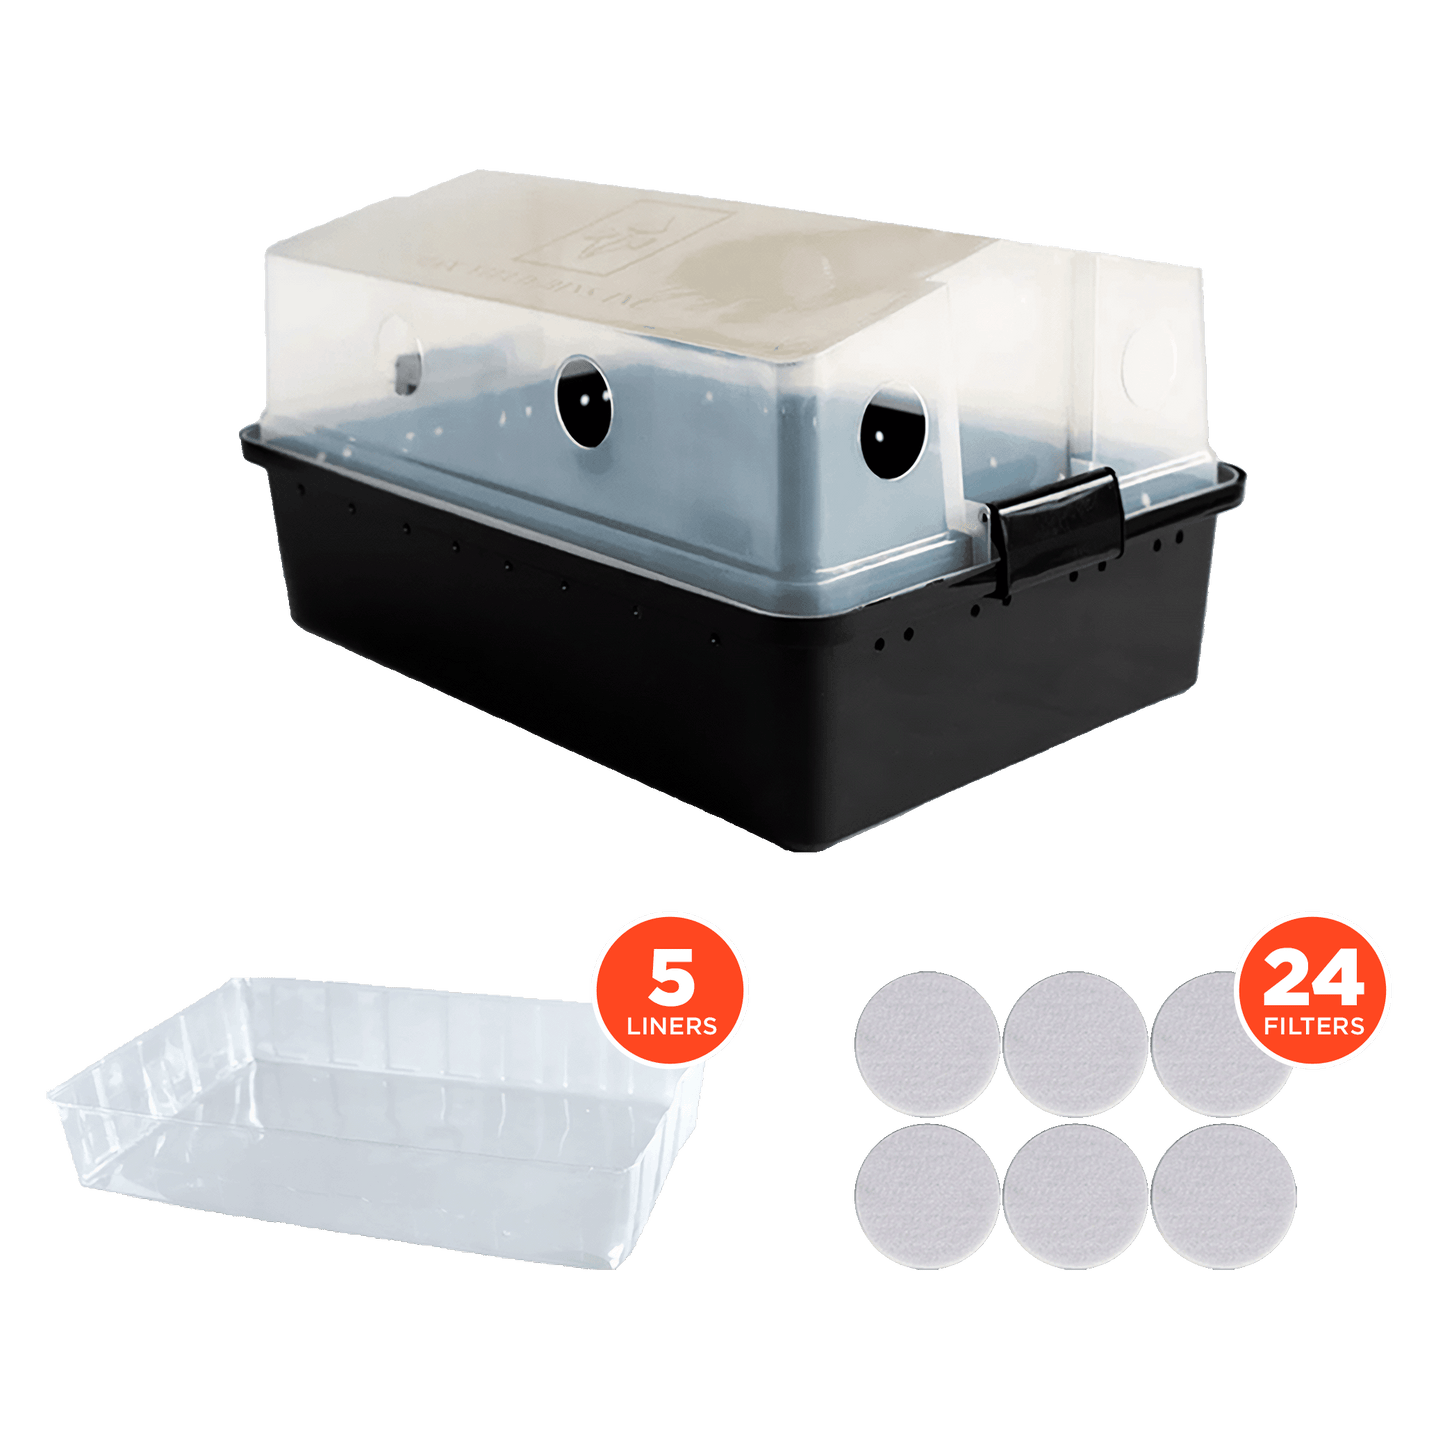 a Kit with one V2 Max Yield Bin, one set of 24 Bin Filters, one set of 5 Bin Liners